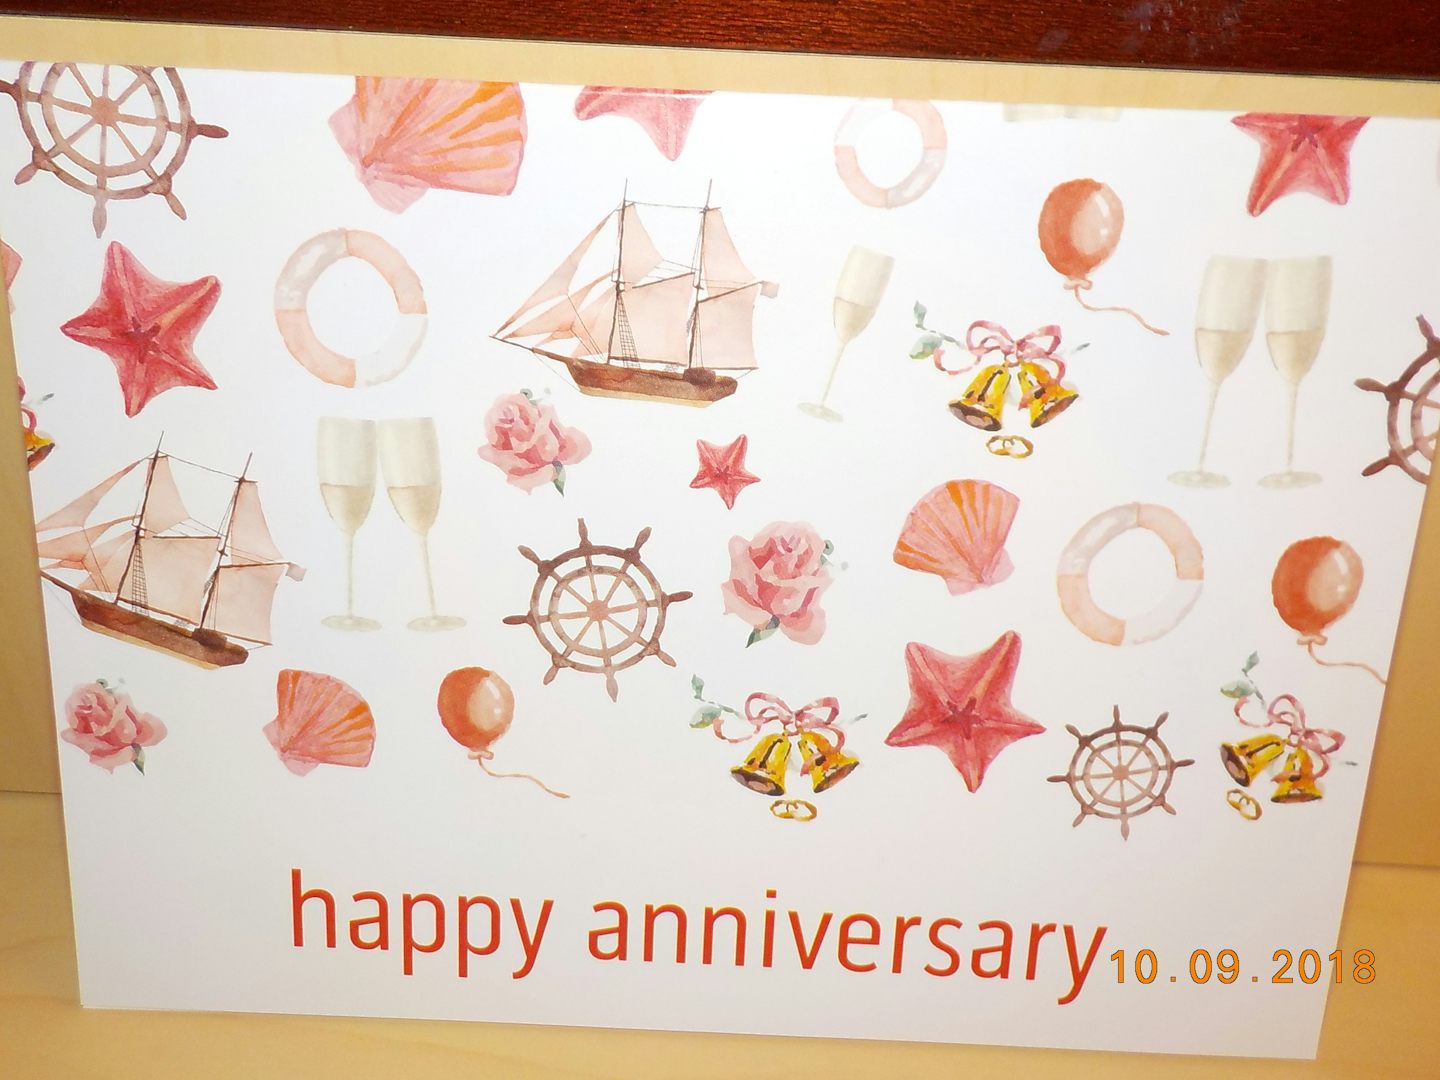 Princess Cruises anniversary poster posted outside cabin door with new logo